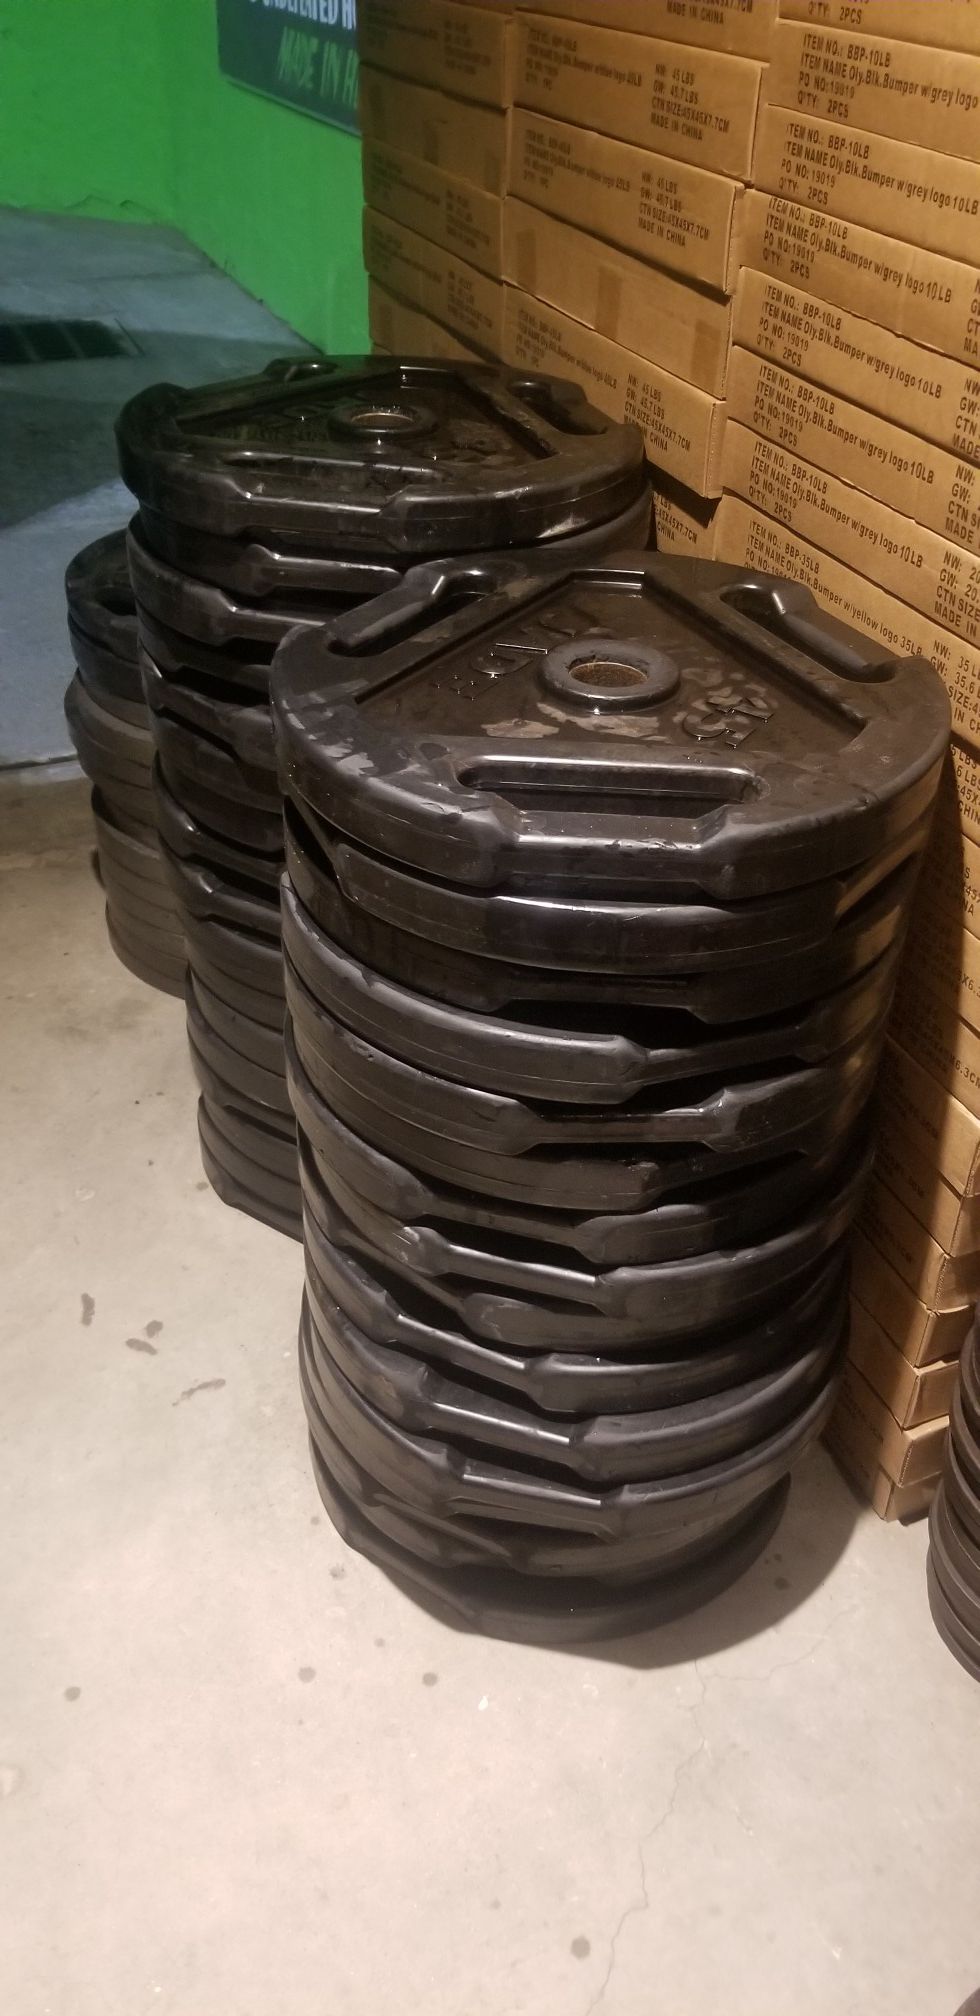 JADE 45LB RUBBER OLYMPIC WEIGHTS PLATES $80 A PAIR